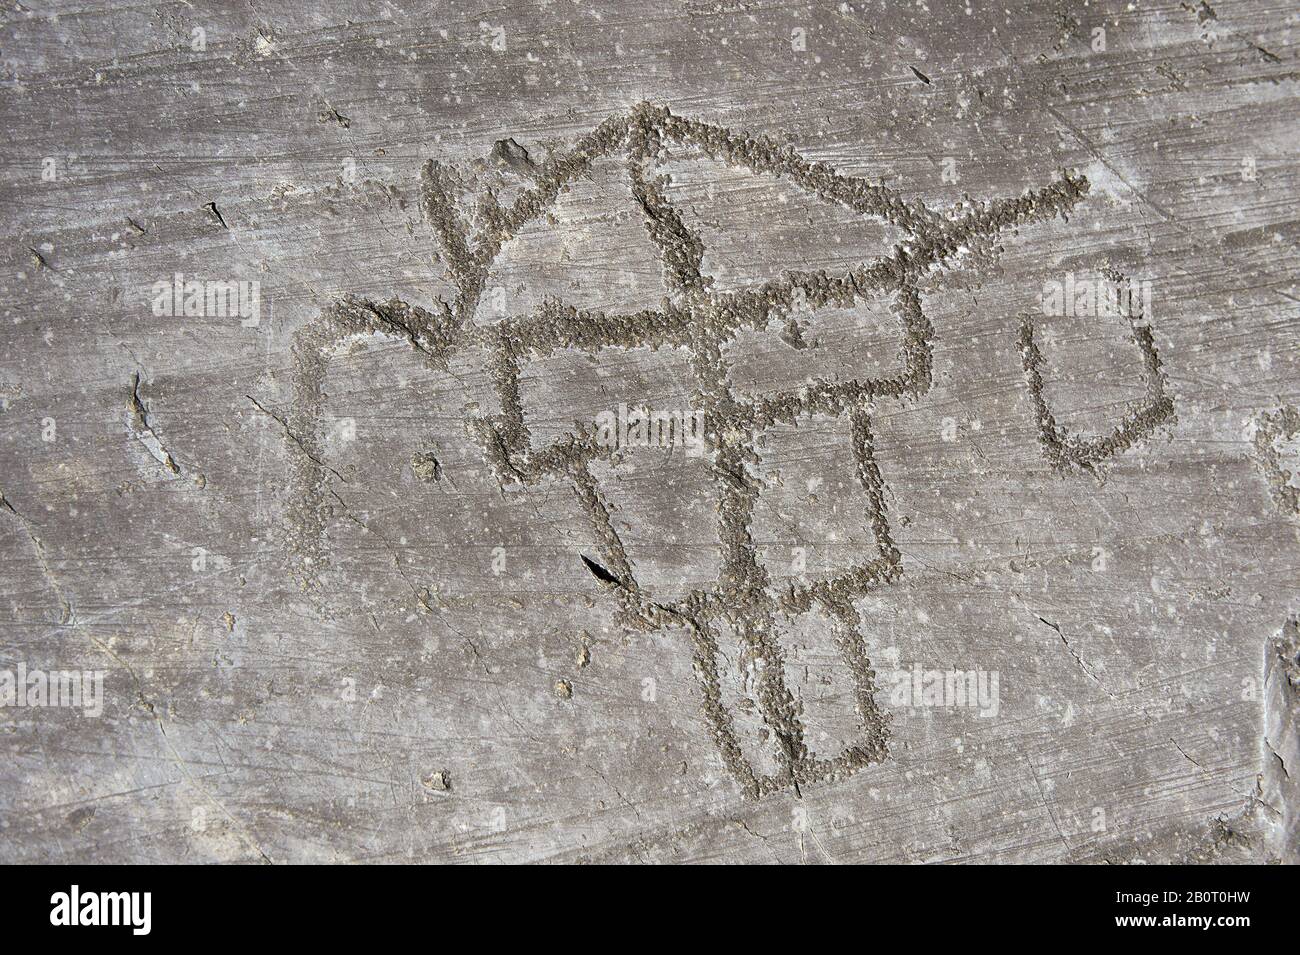 Petroglyph, rock carving, of two feet outlines. Carved by the ancient Camunni people in the iron age between 1000-1600 BC. Rock no 24,  Foppi di Nadro Stock Photo